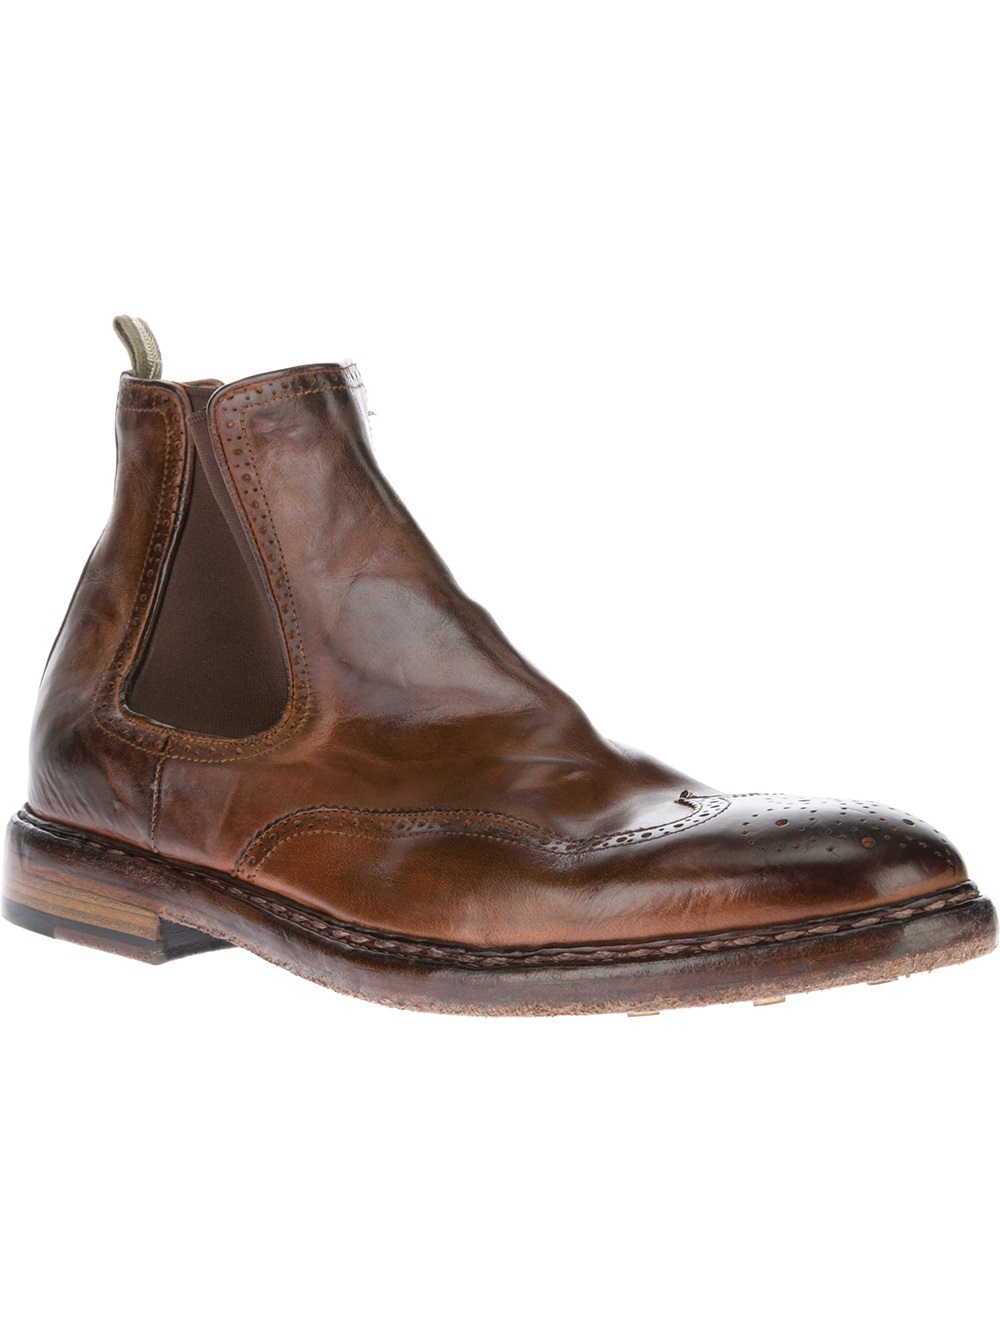 Lyst - Officine Creative Brogue Chelsea Boots in Brown for Men